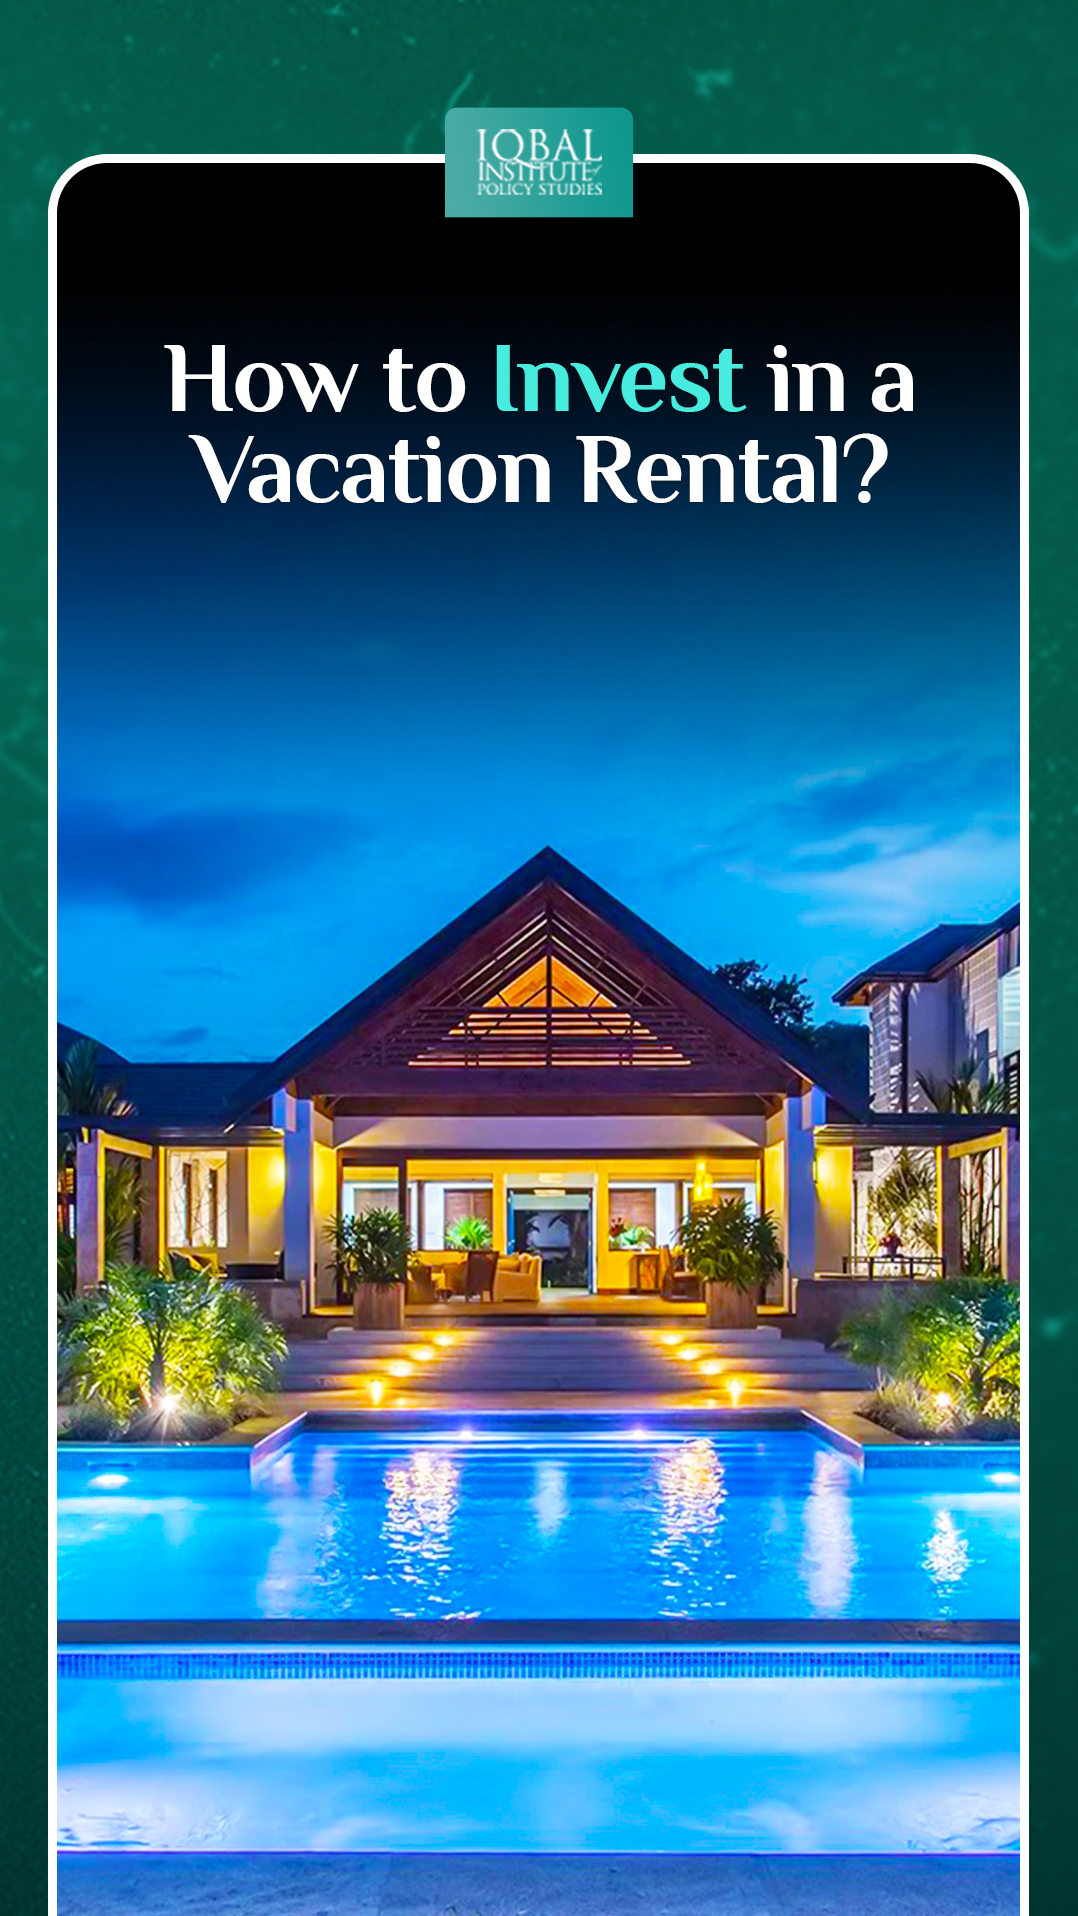 How to Invest in a Vacation Rental?